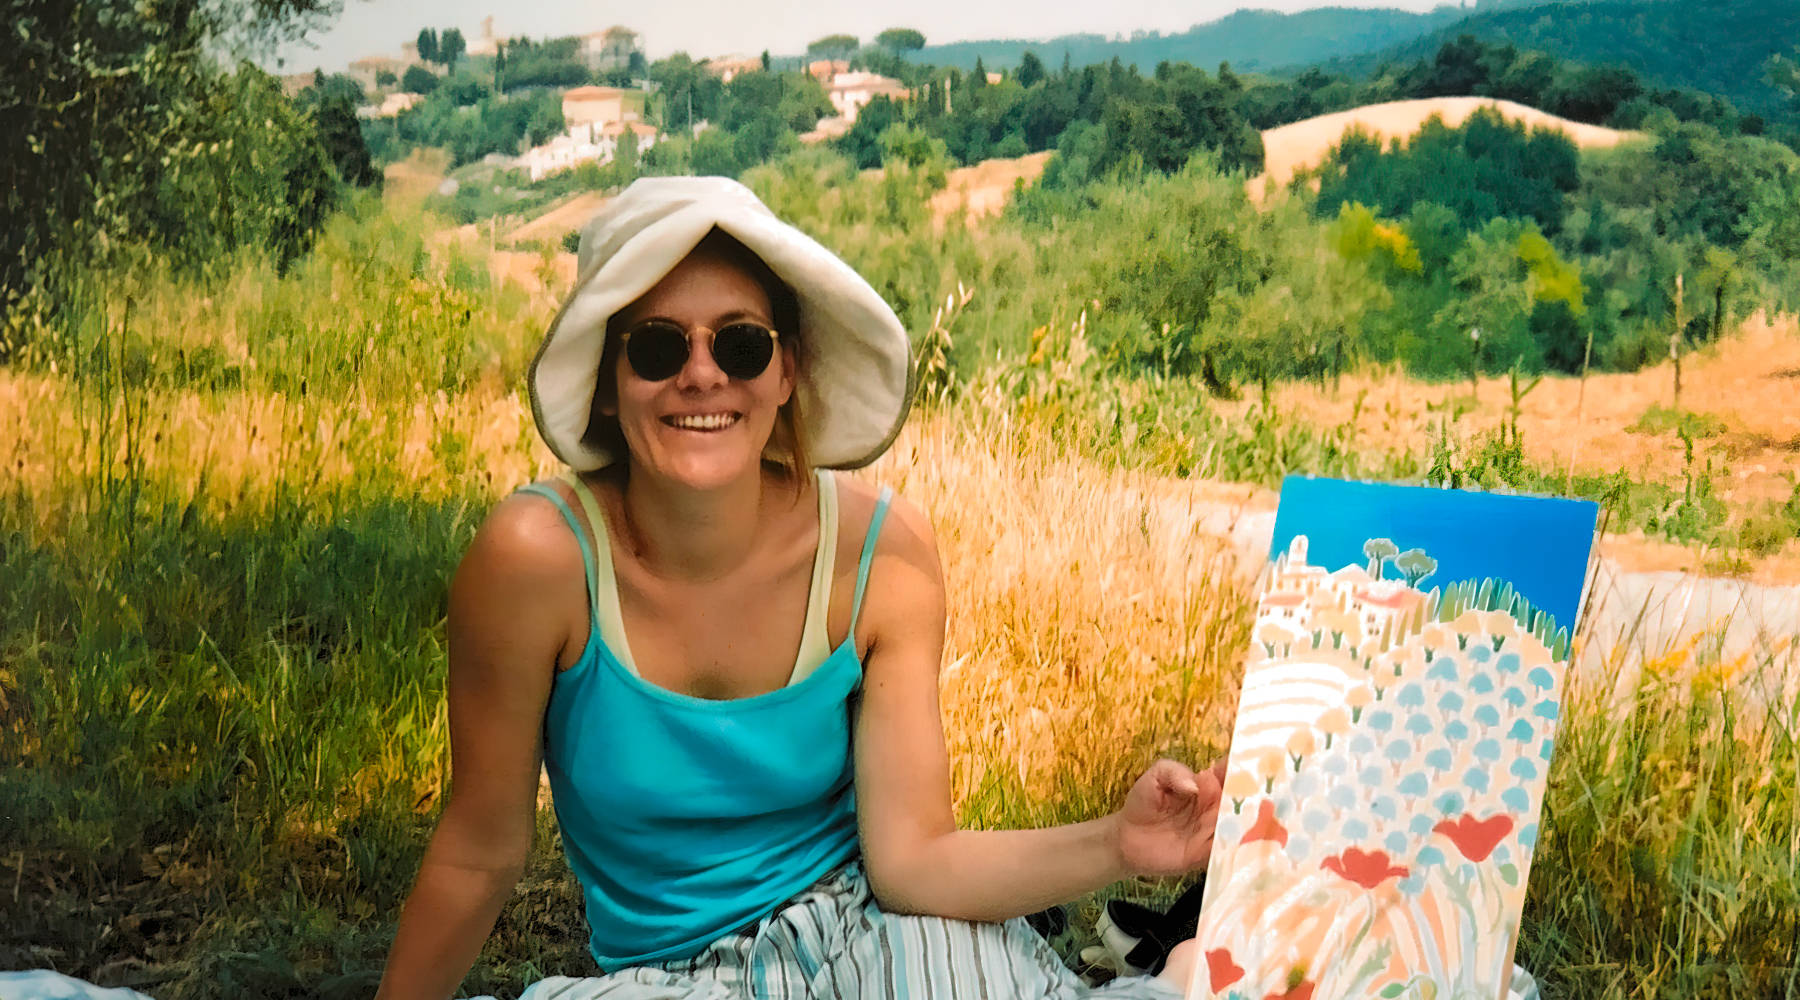 Artist Joanne Short painting in Tuscany, Italy